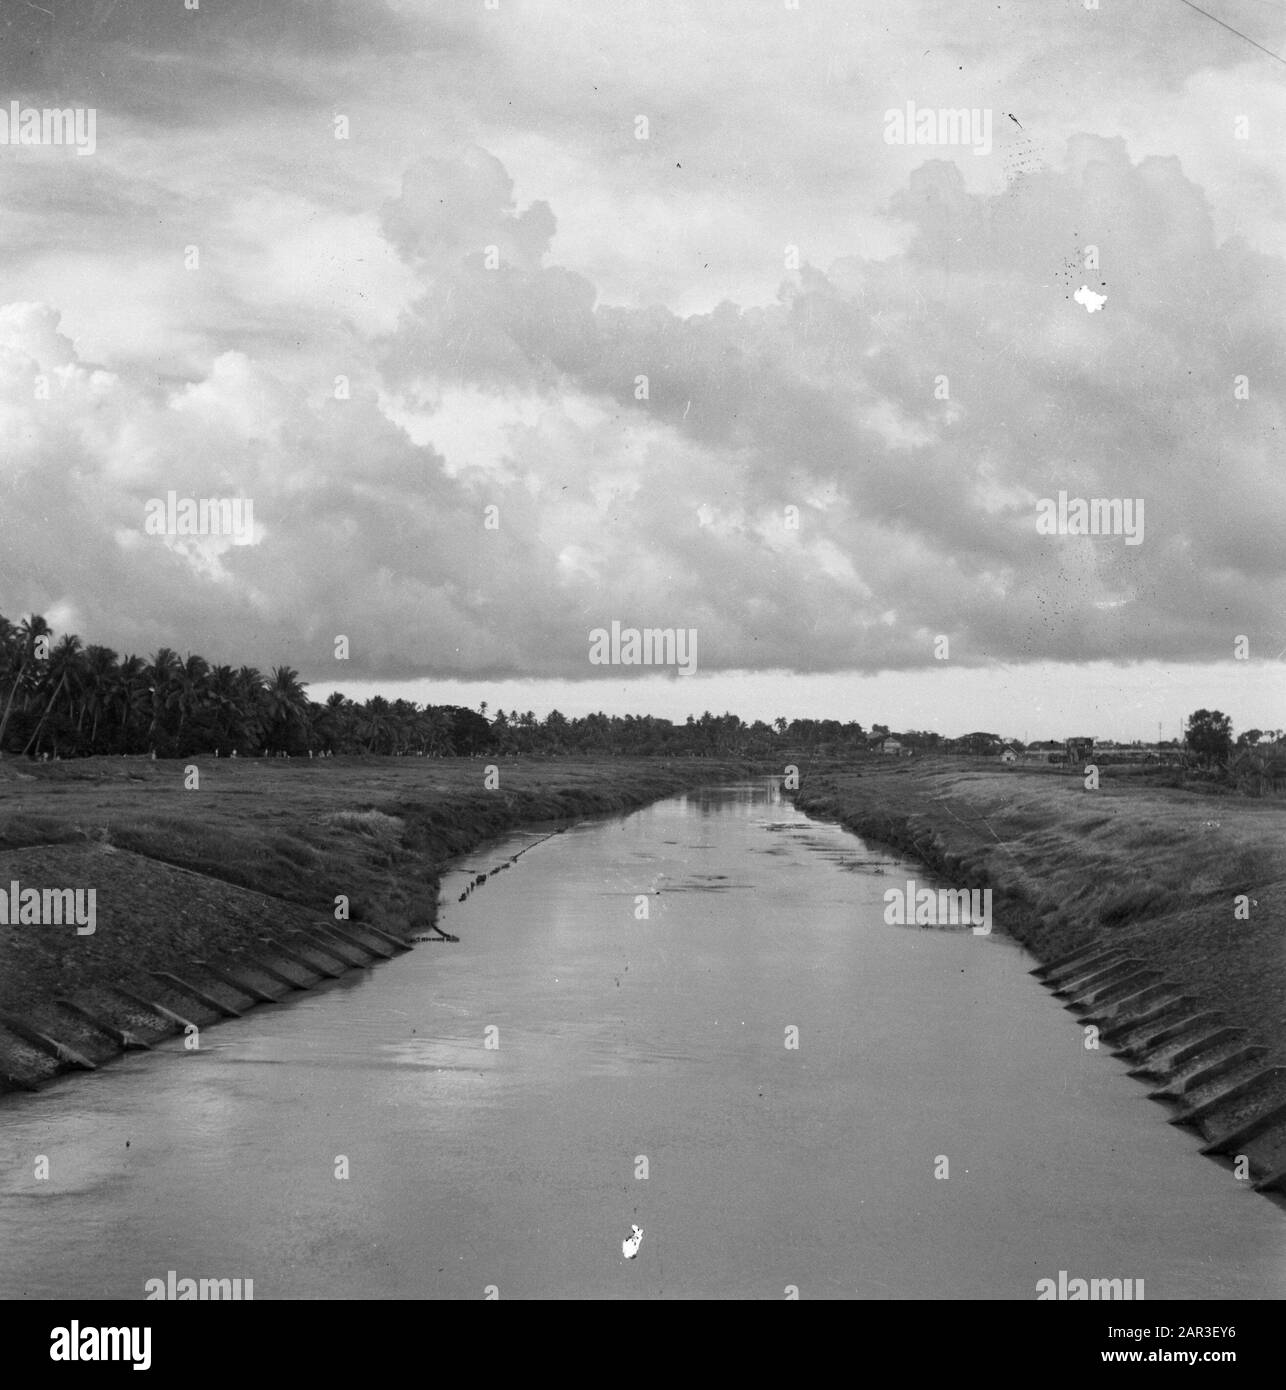 [Channel or river] Date: 1947 Location: Indonesia, Dutch East Indies Stock Photo